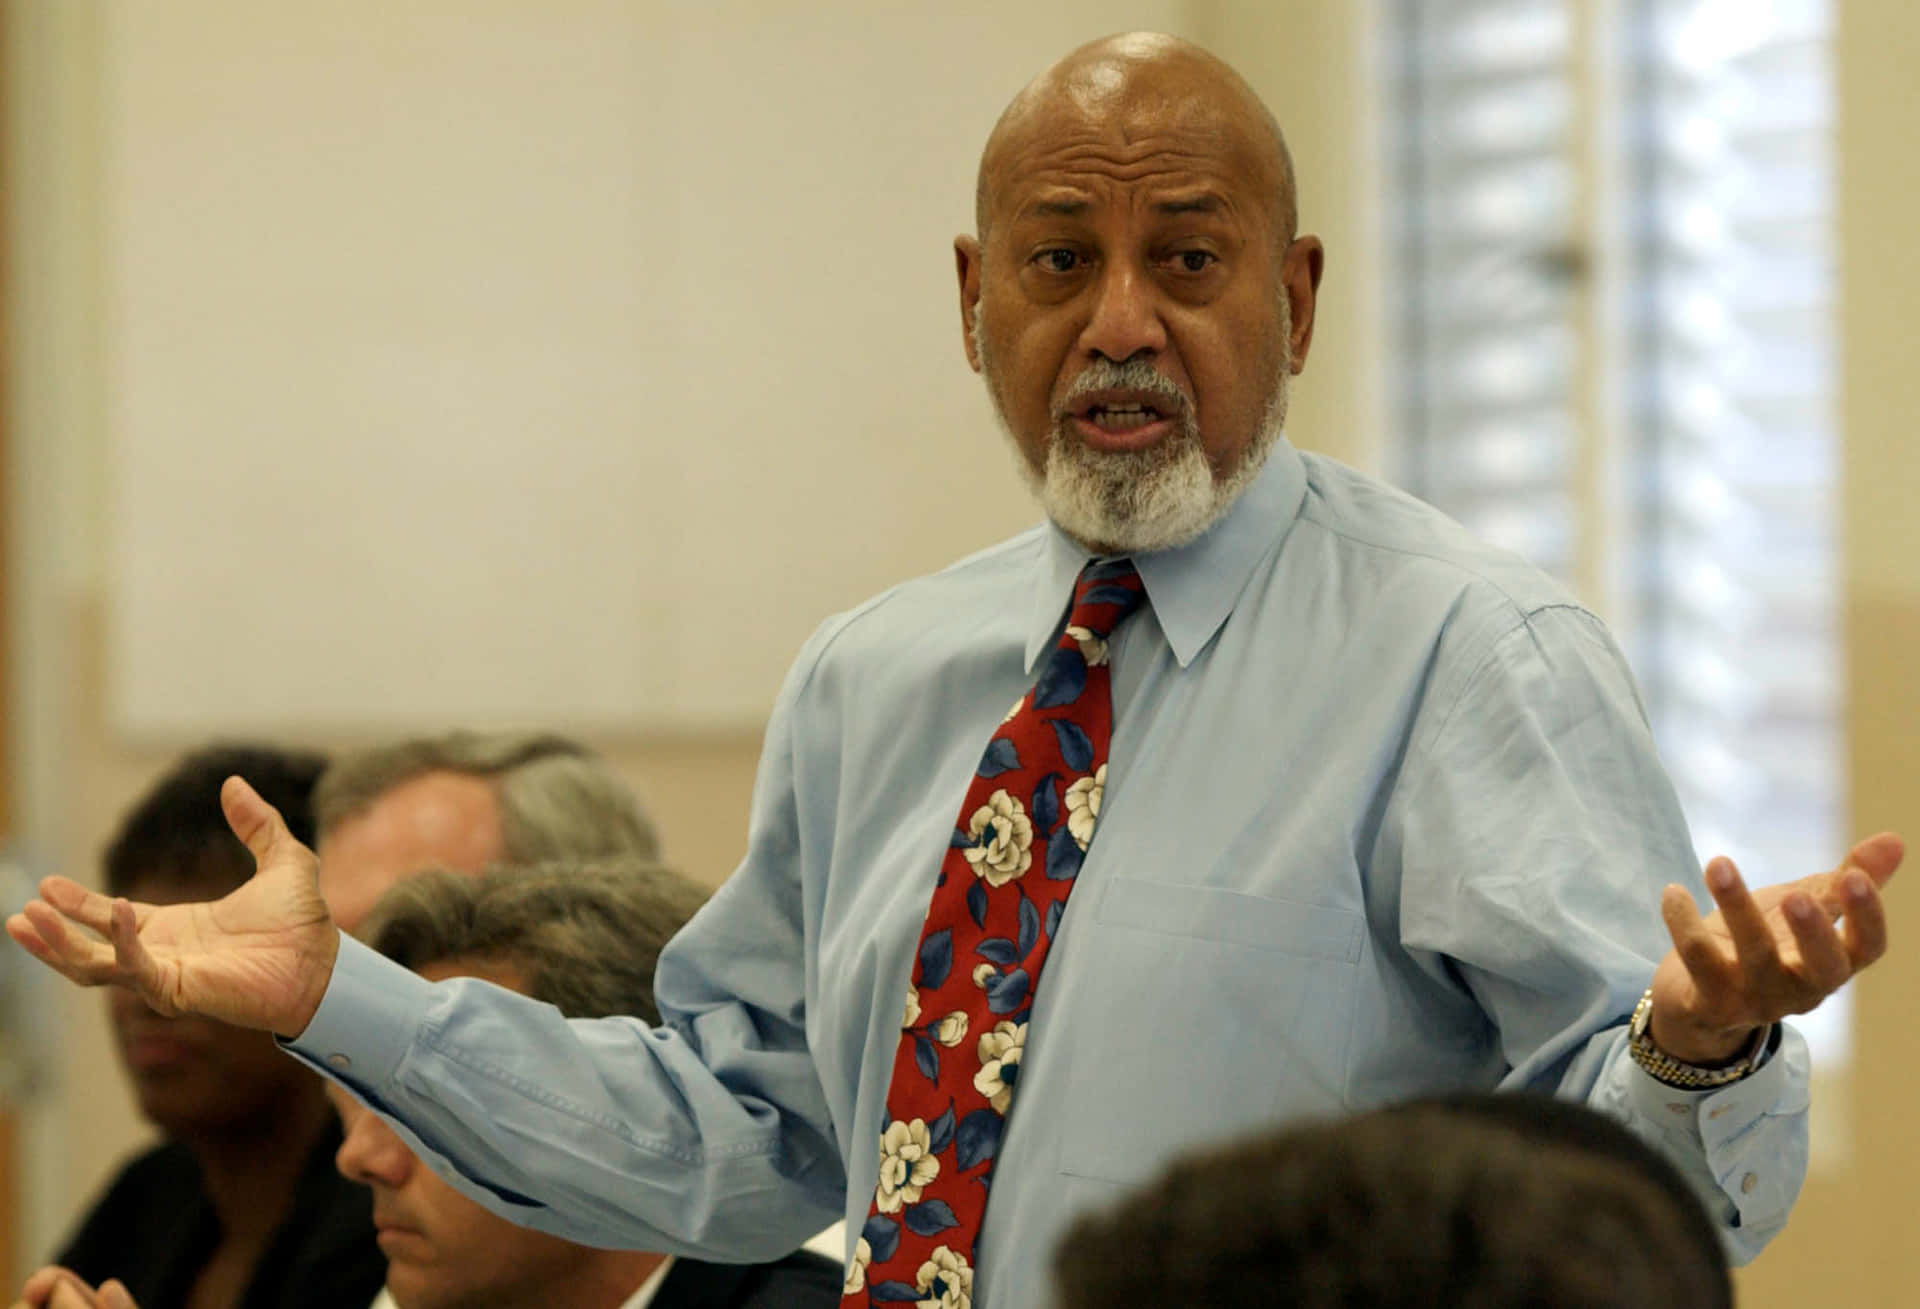 U.S. Congressman Alcee Hastings In a Serious Discussion Wallpaper